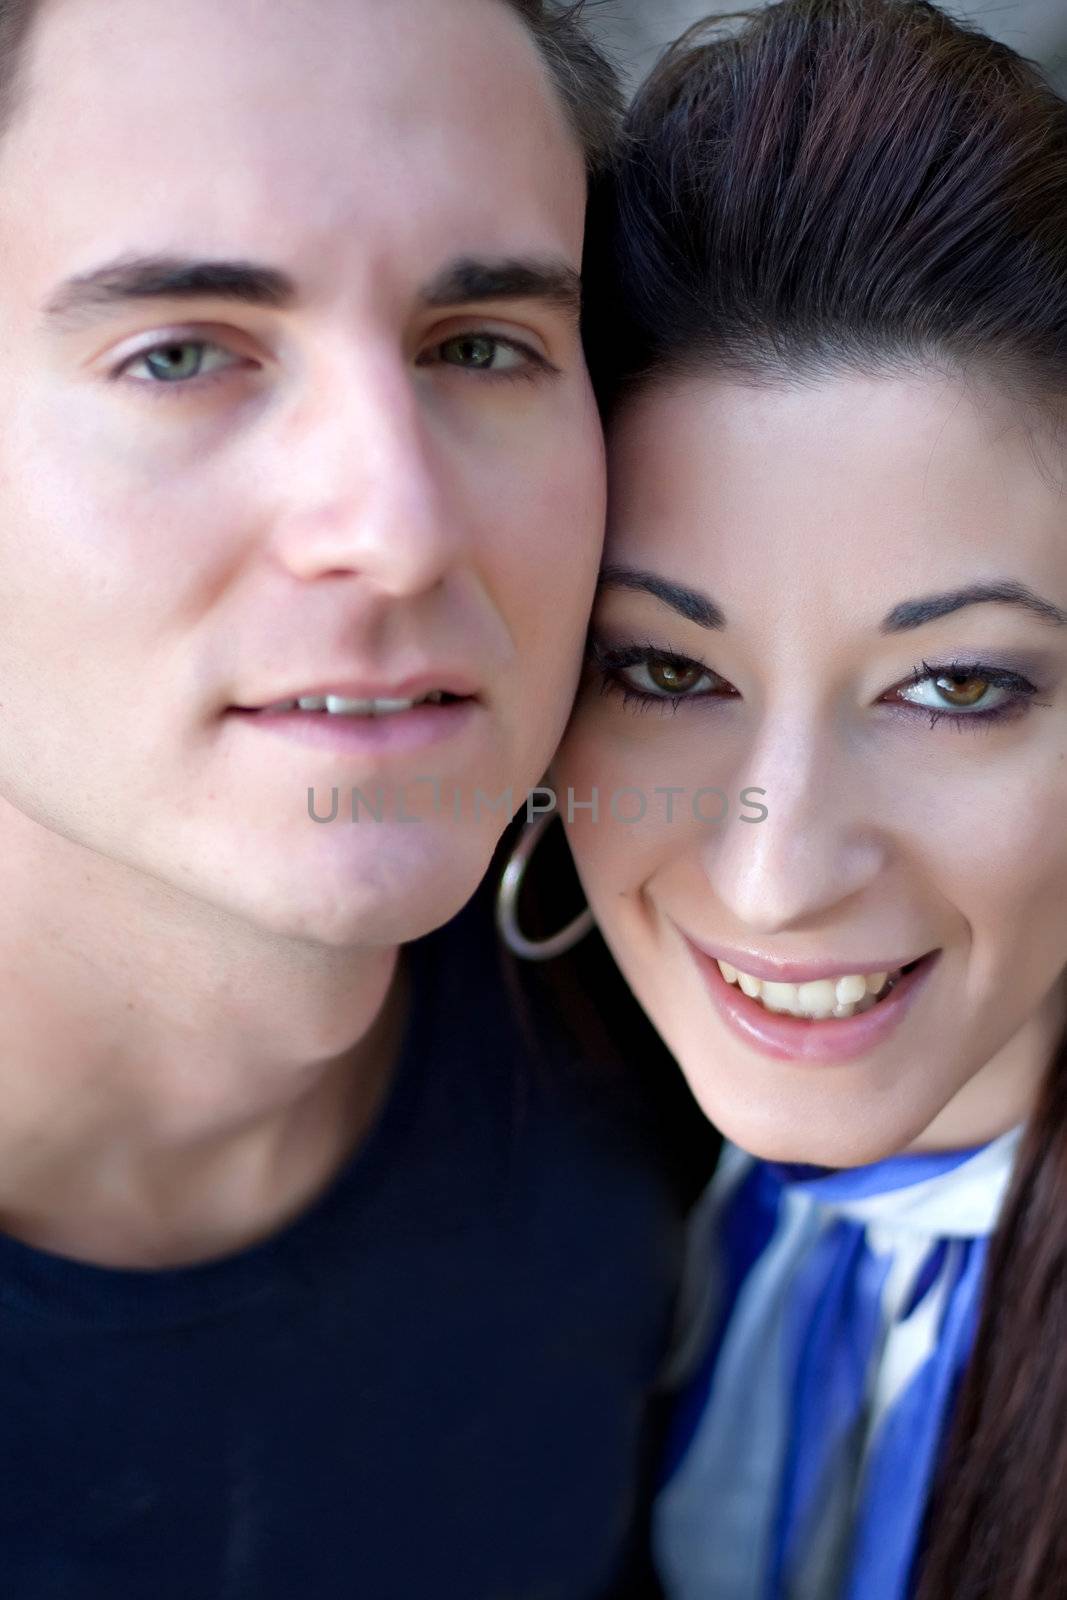 A happy young couple in their mid 20s smiling with their heads close together. Shallow depth of field with sharpest focus on the woman.